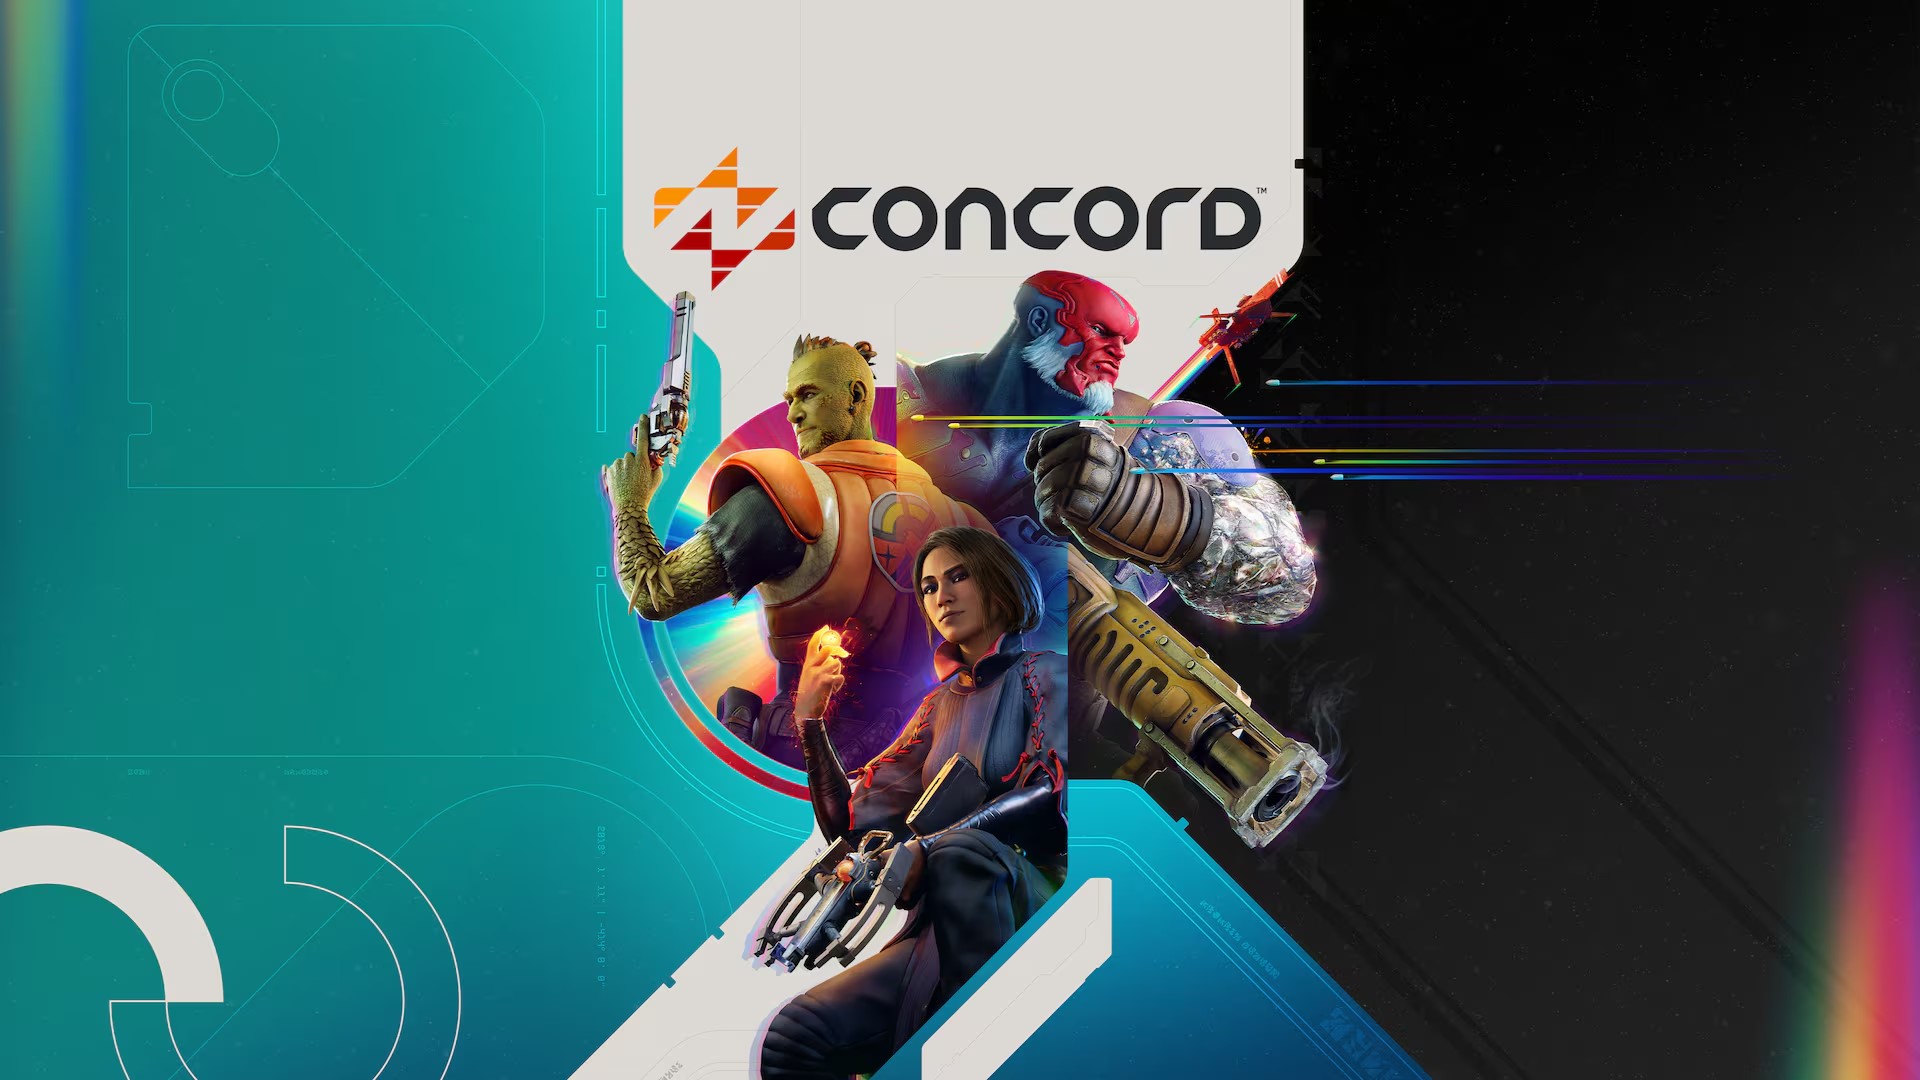 Concord Will Have 2 Editions, Cost $40, And Require PSN Account